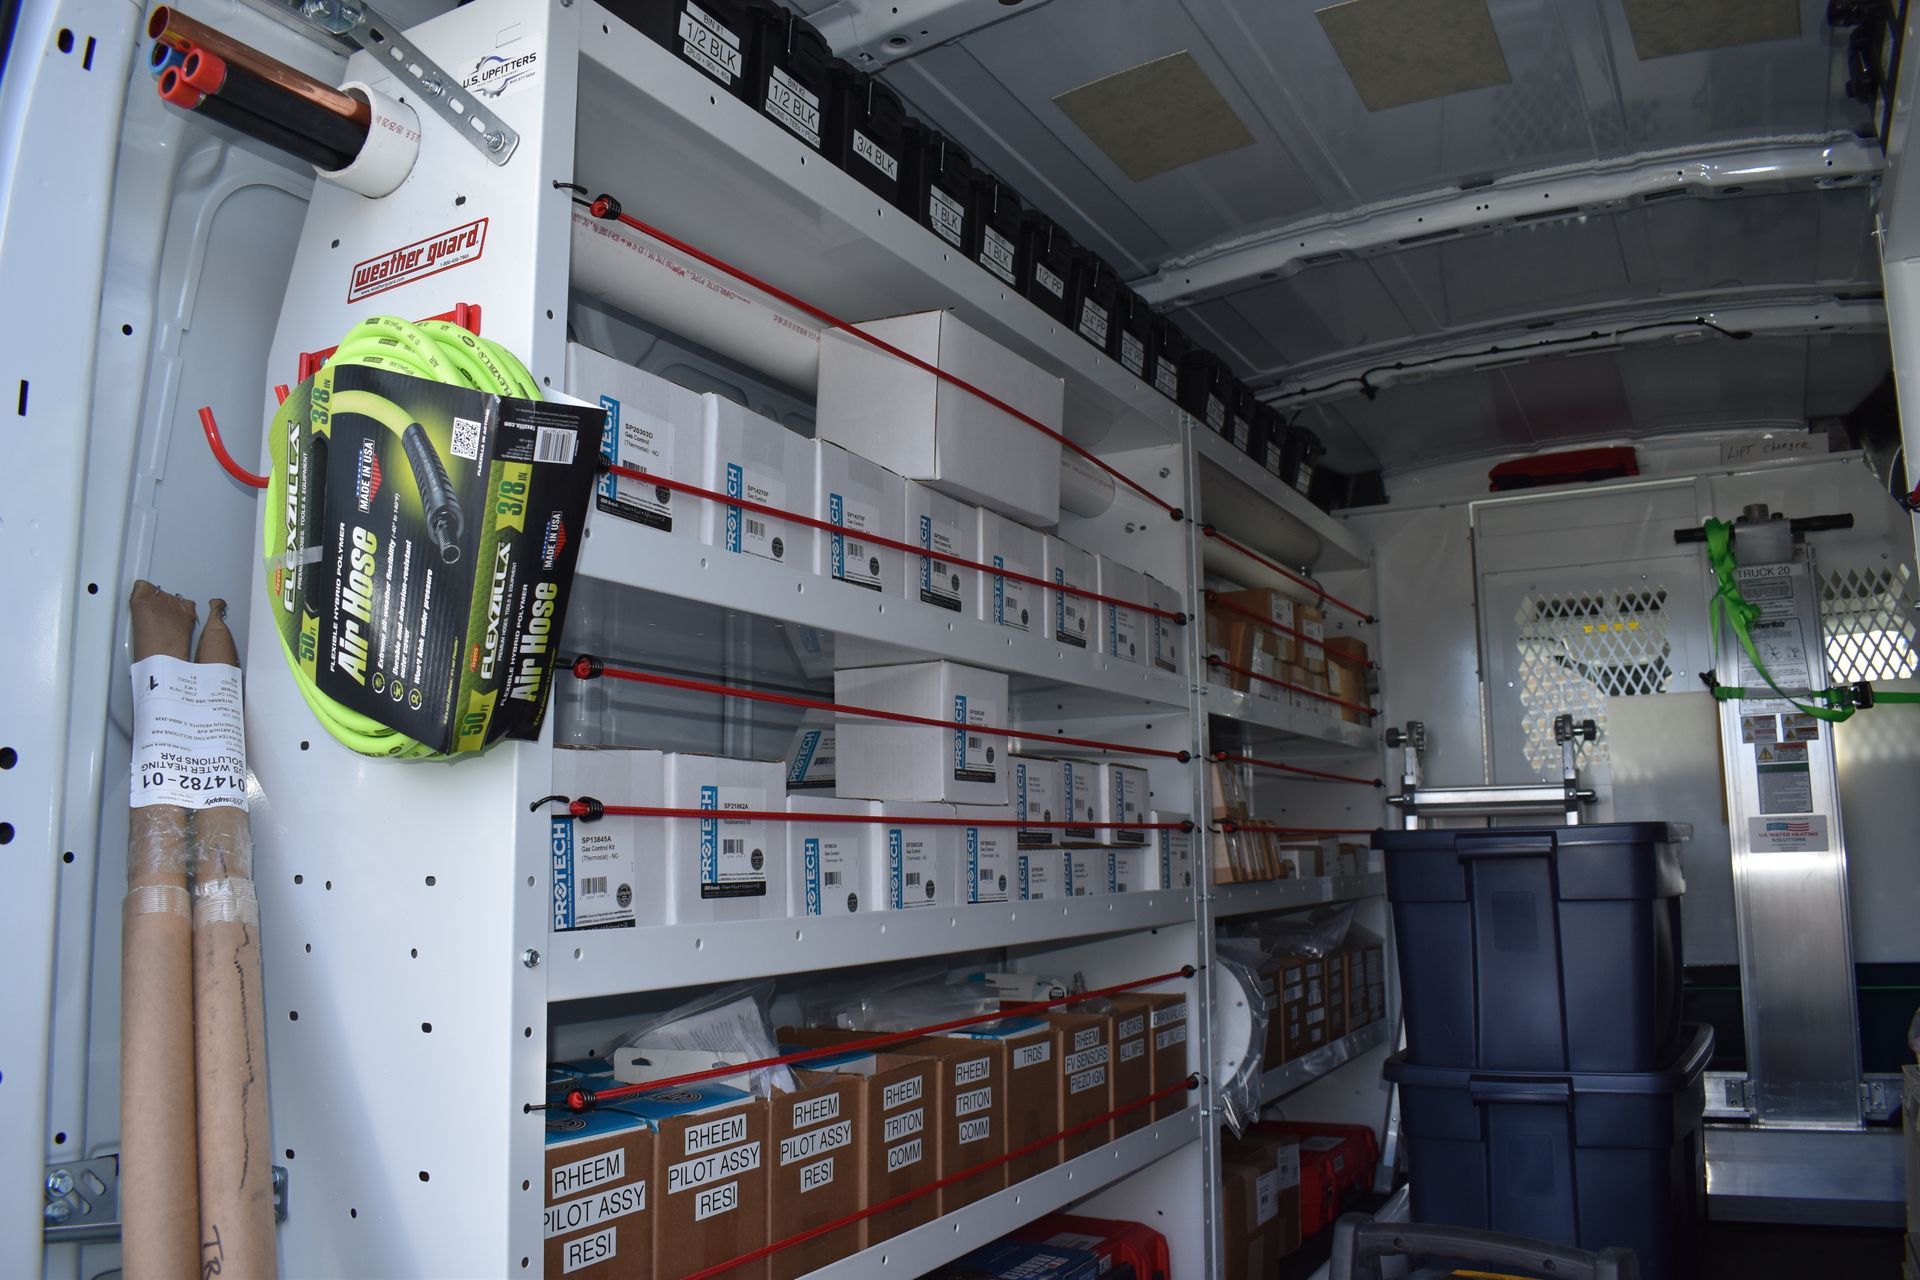 Inside water heater service technician service vehicle, stocked with two shelves of gas valves